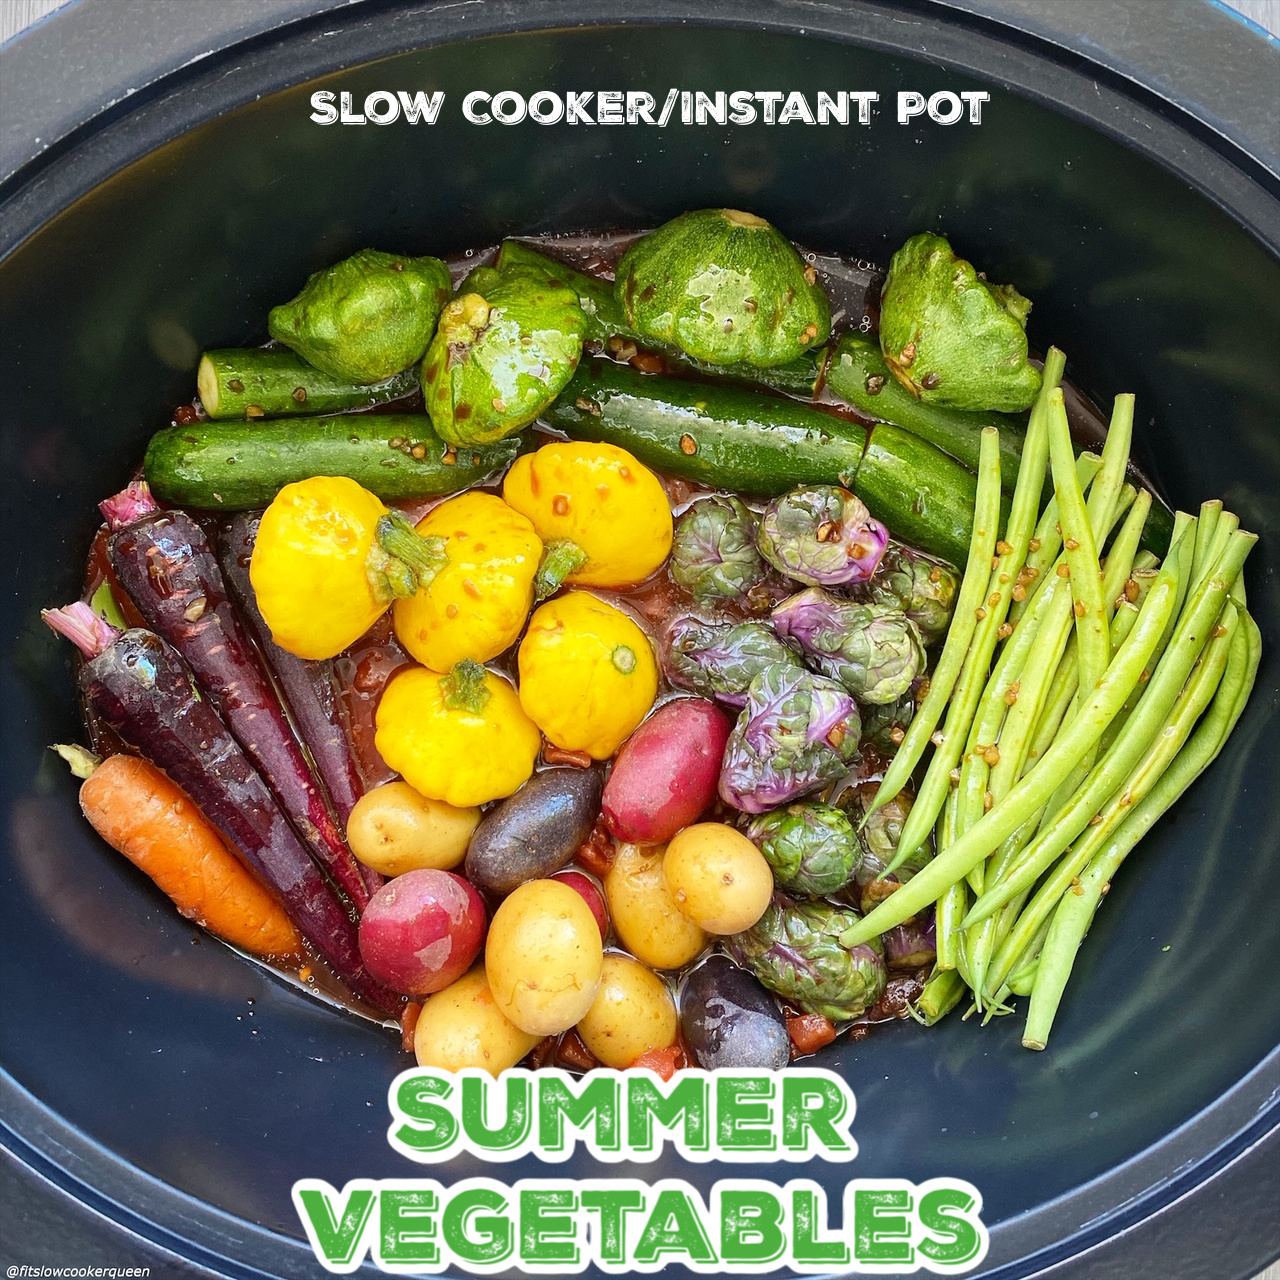 https://fitslowcookerqueen.com/wp-content/uploads/2020/05/VIDEO-slow-cooker-instant-pot-summer-vegetables-low-carb-paleo-whole30-9-1.jpg